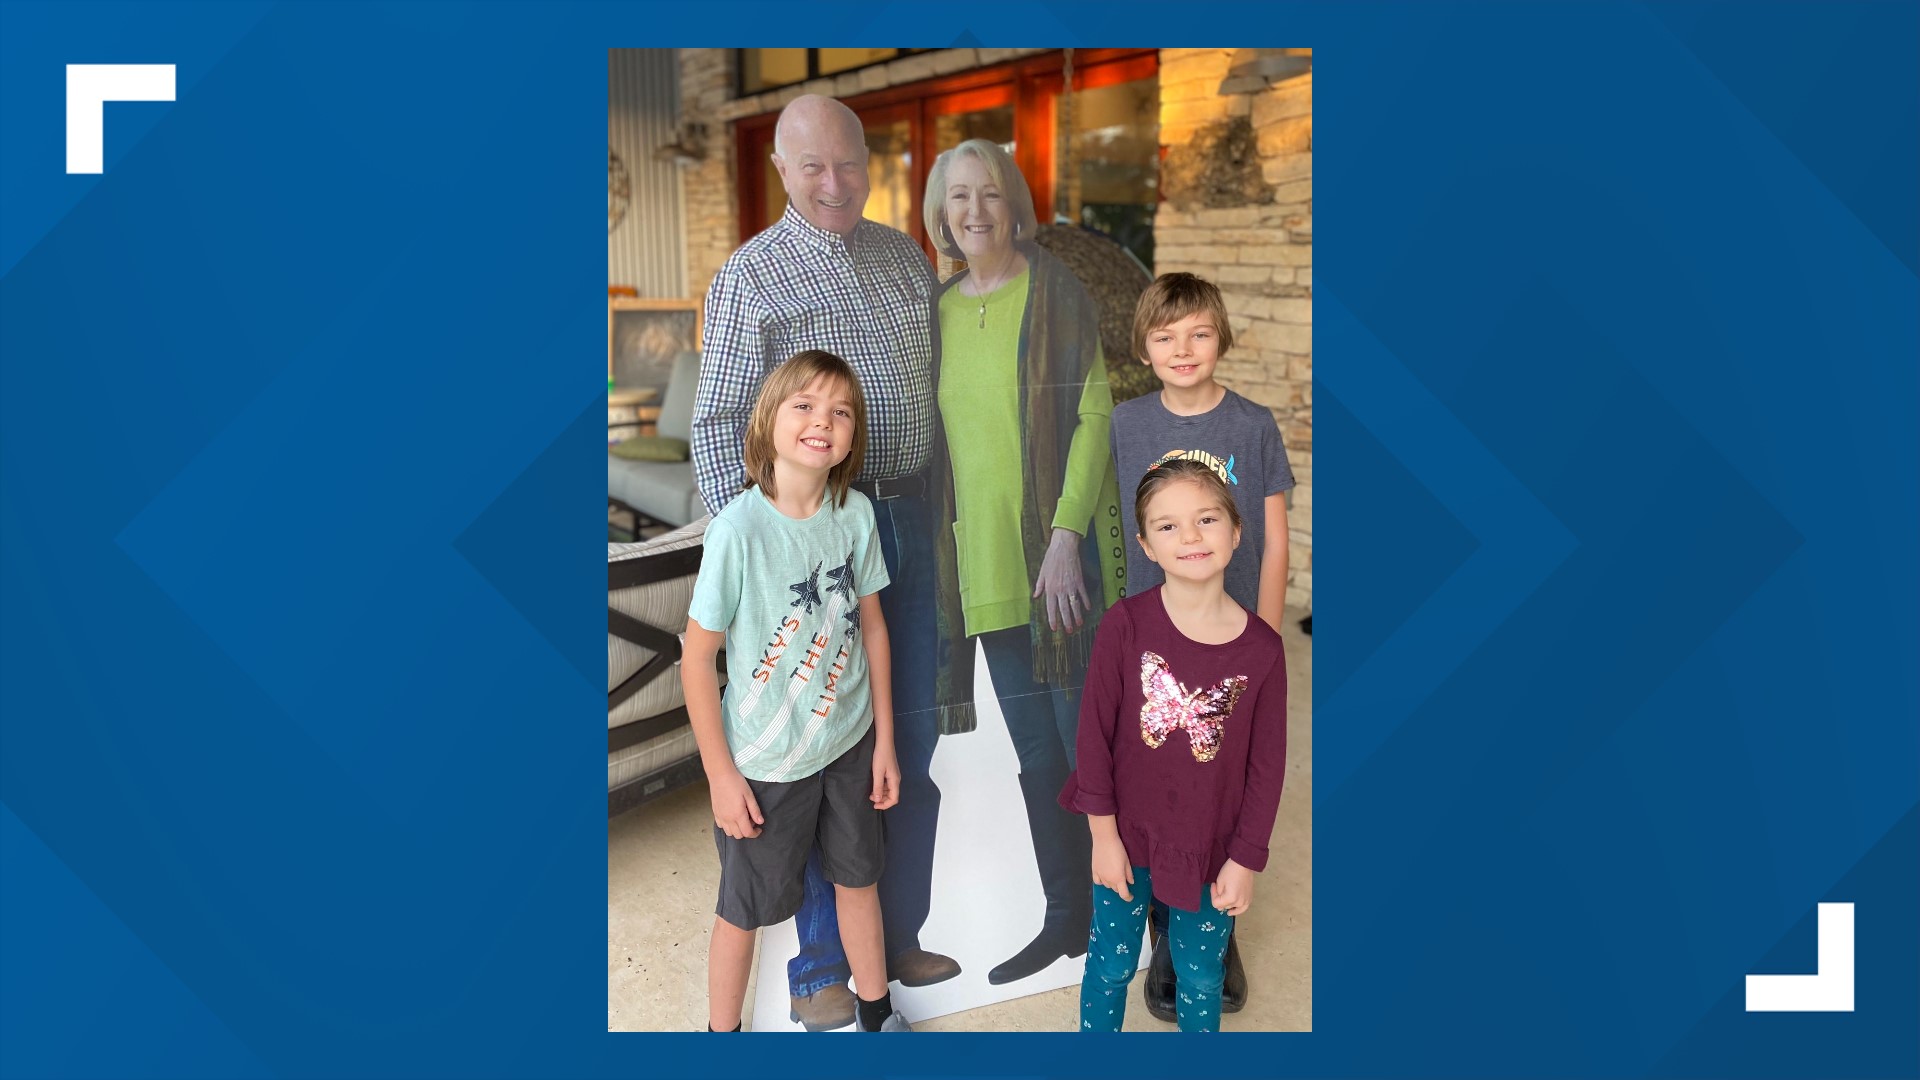 Rockwall’s Missy and Barry Buchanan sent a cardboard cutout of themselves to give the grandkids a laugh in a challenging year.